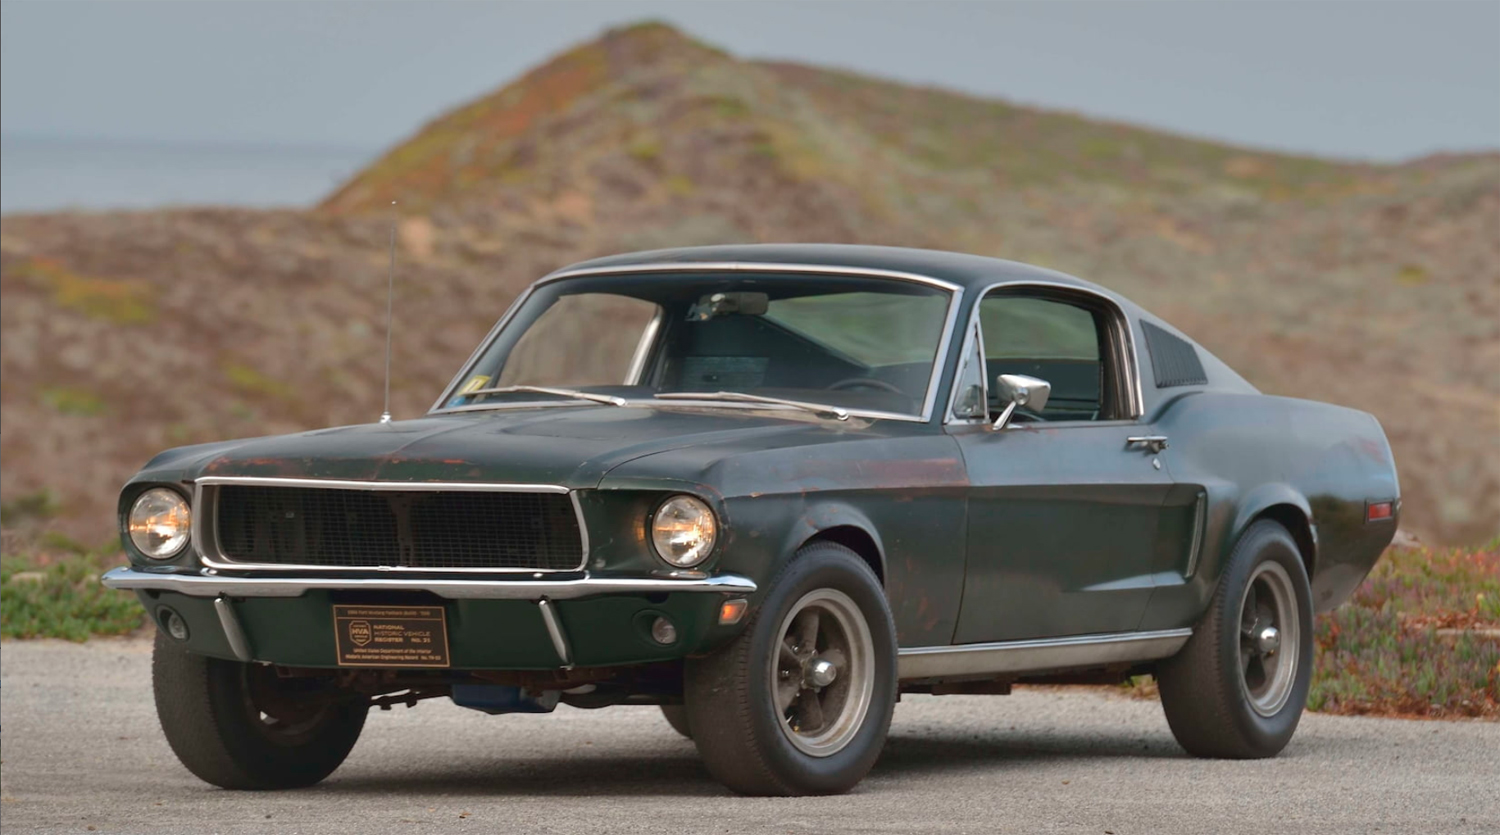 The Real 1968 Ford Mustang Bullitt Estimated To Sell For